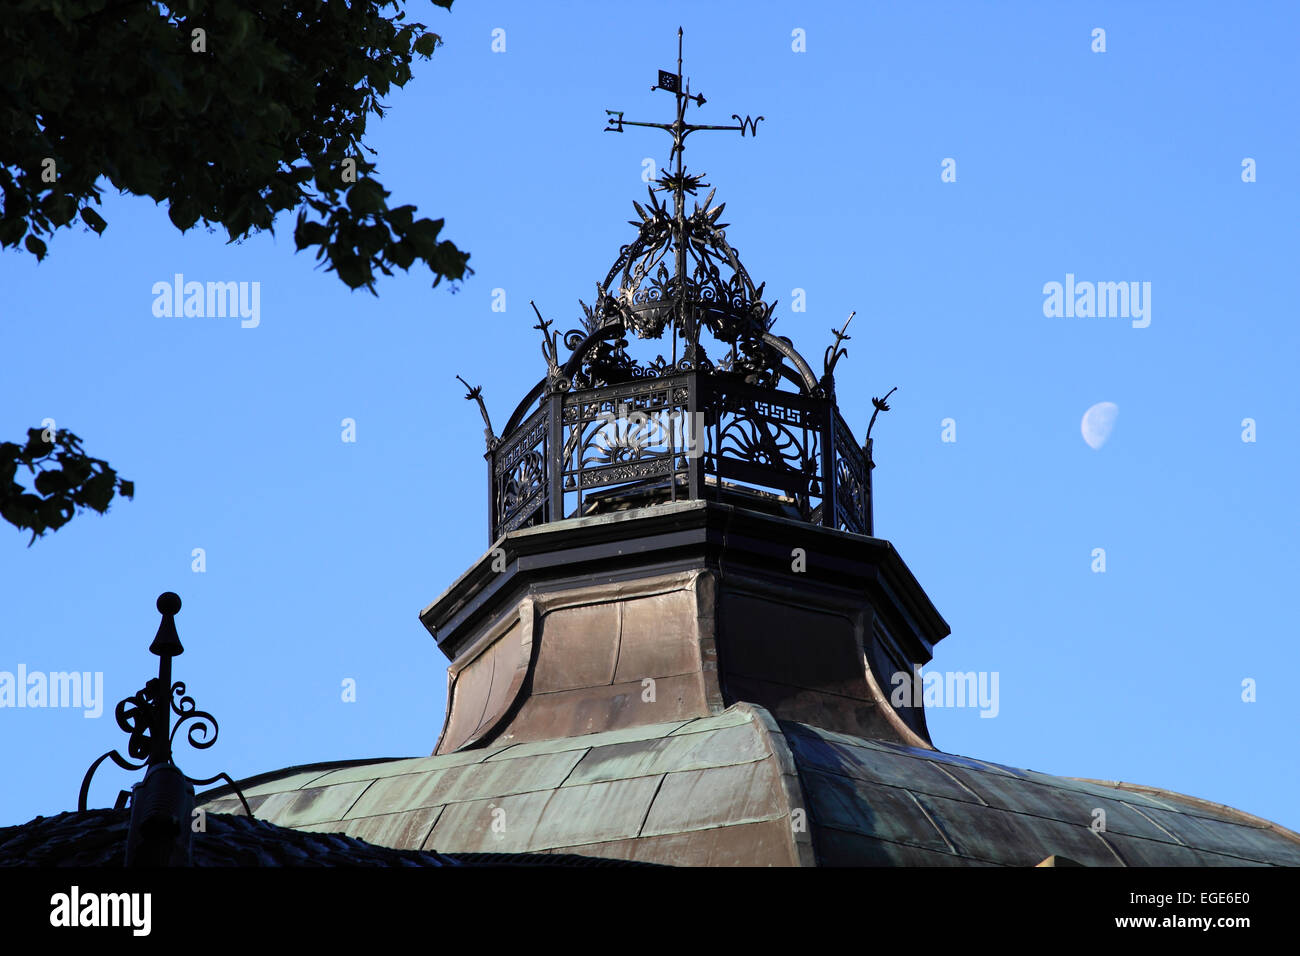 Elaborate rooftop detail of the Royal Pump Room against a cloudless sky with moon / Harrogate / North Yorkshire / UK Stock Photo